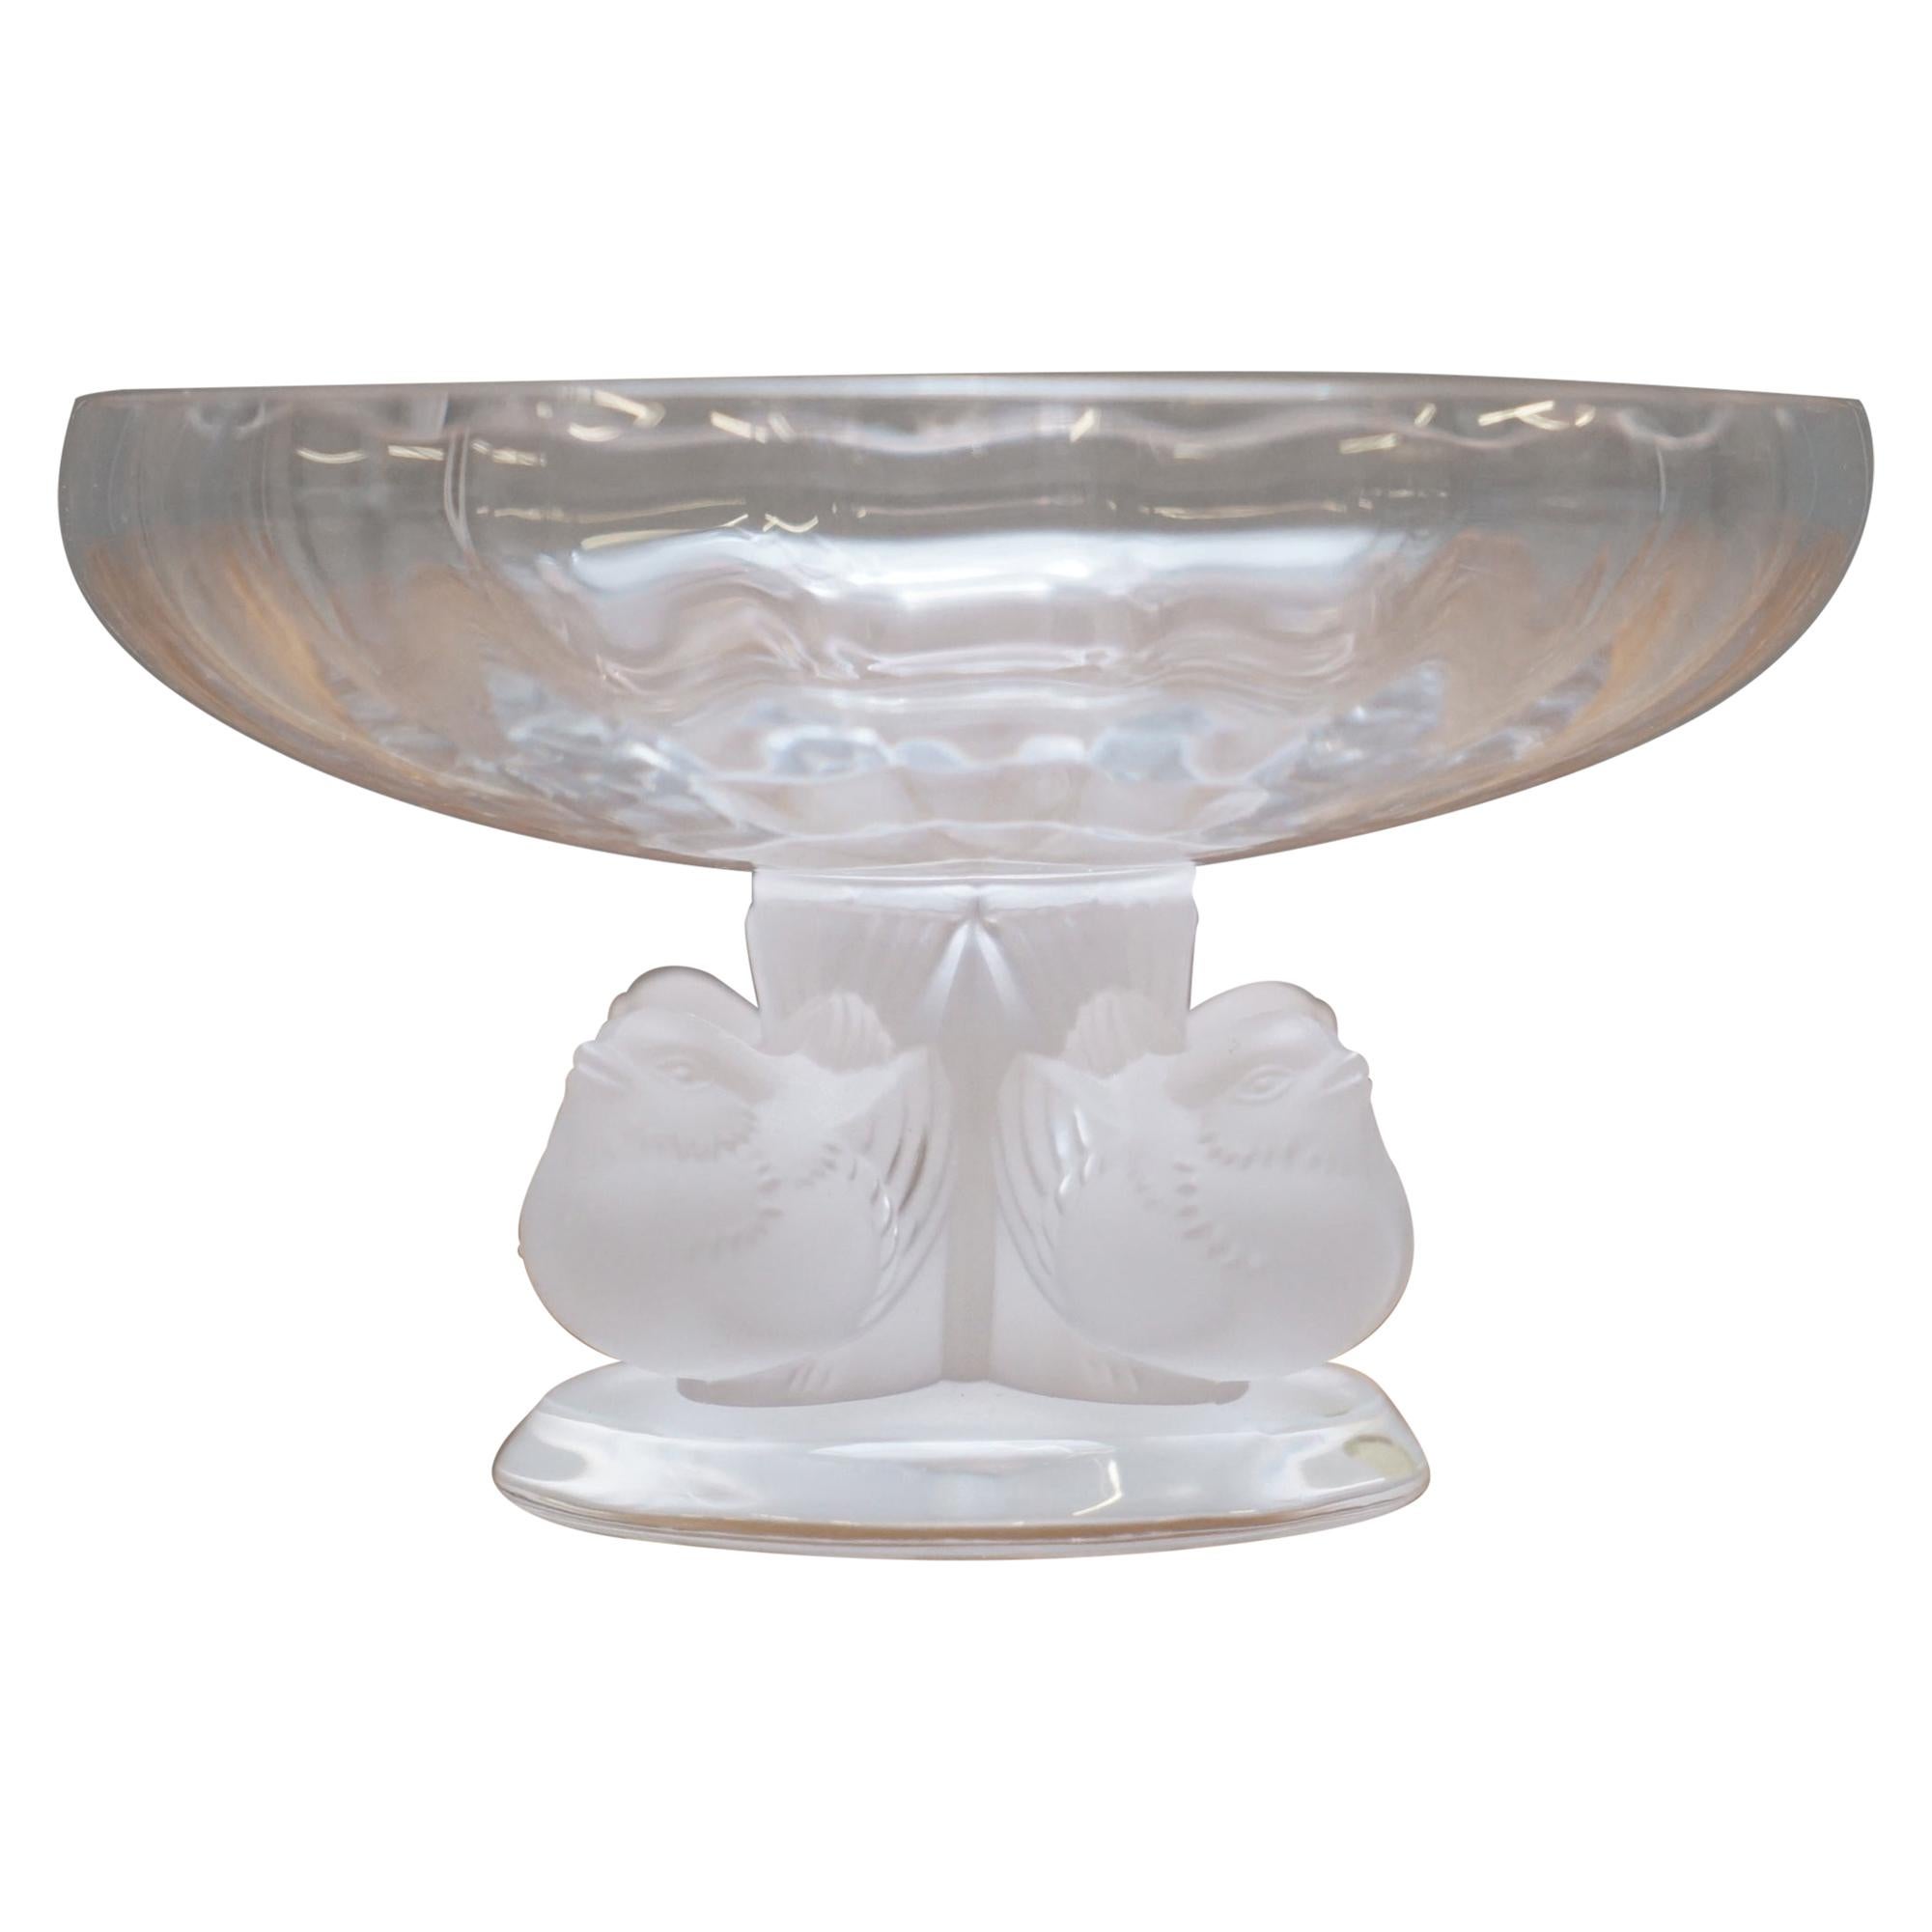 Stunning Lalique Crystal Nogent Bird Bowl Designed in 1948 by Marc Lalique